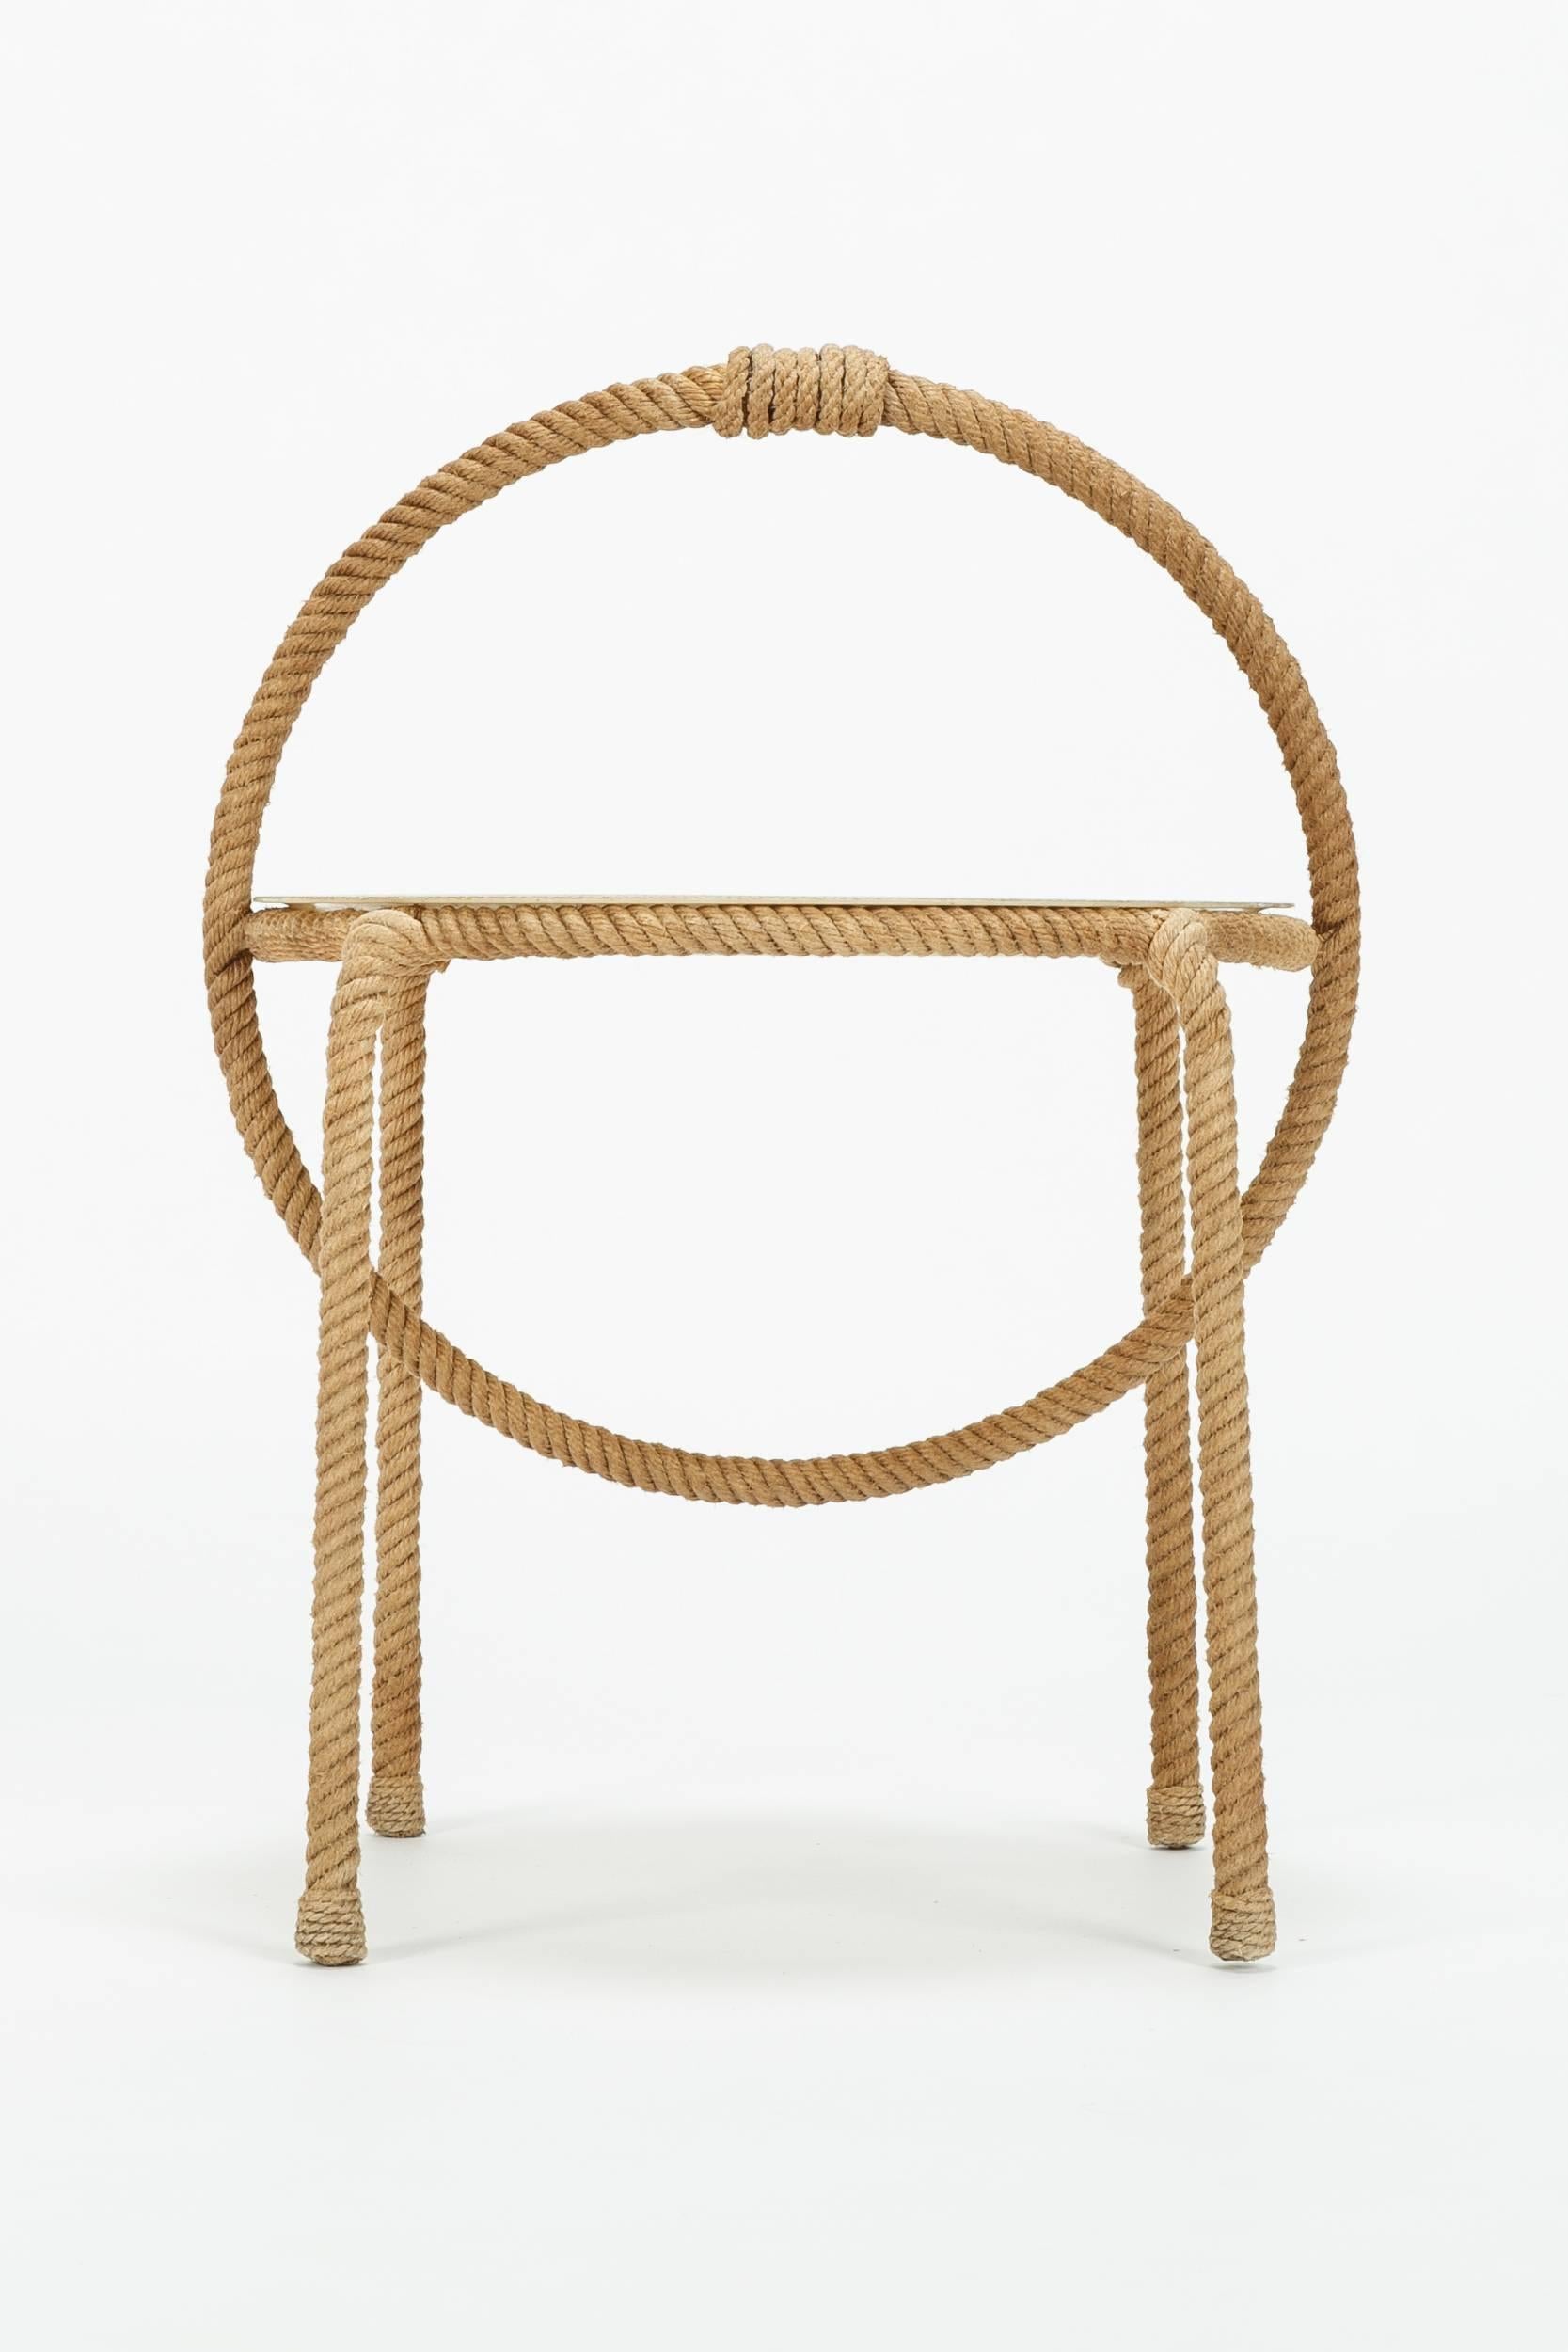 Exceptional tray table by Adrien Audoux & Frida Minet, manufactured by Vibo in France in the 1950s. Frame is made of rope, tray is made of fiberglass and can be used for serving.